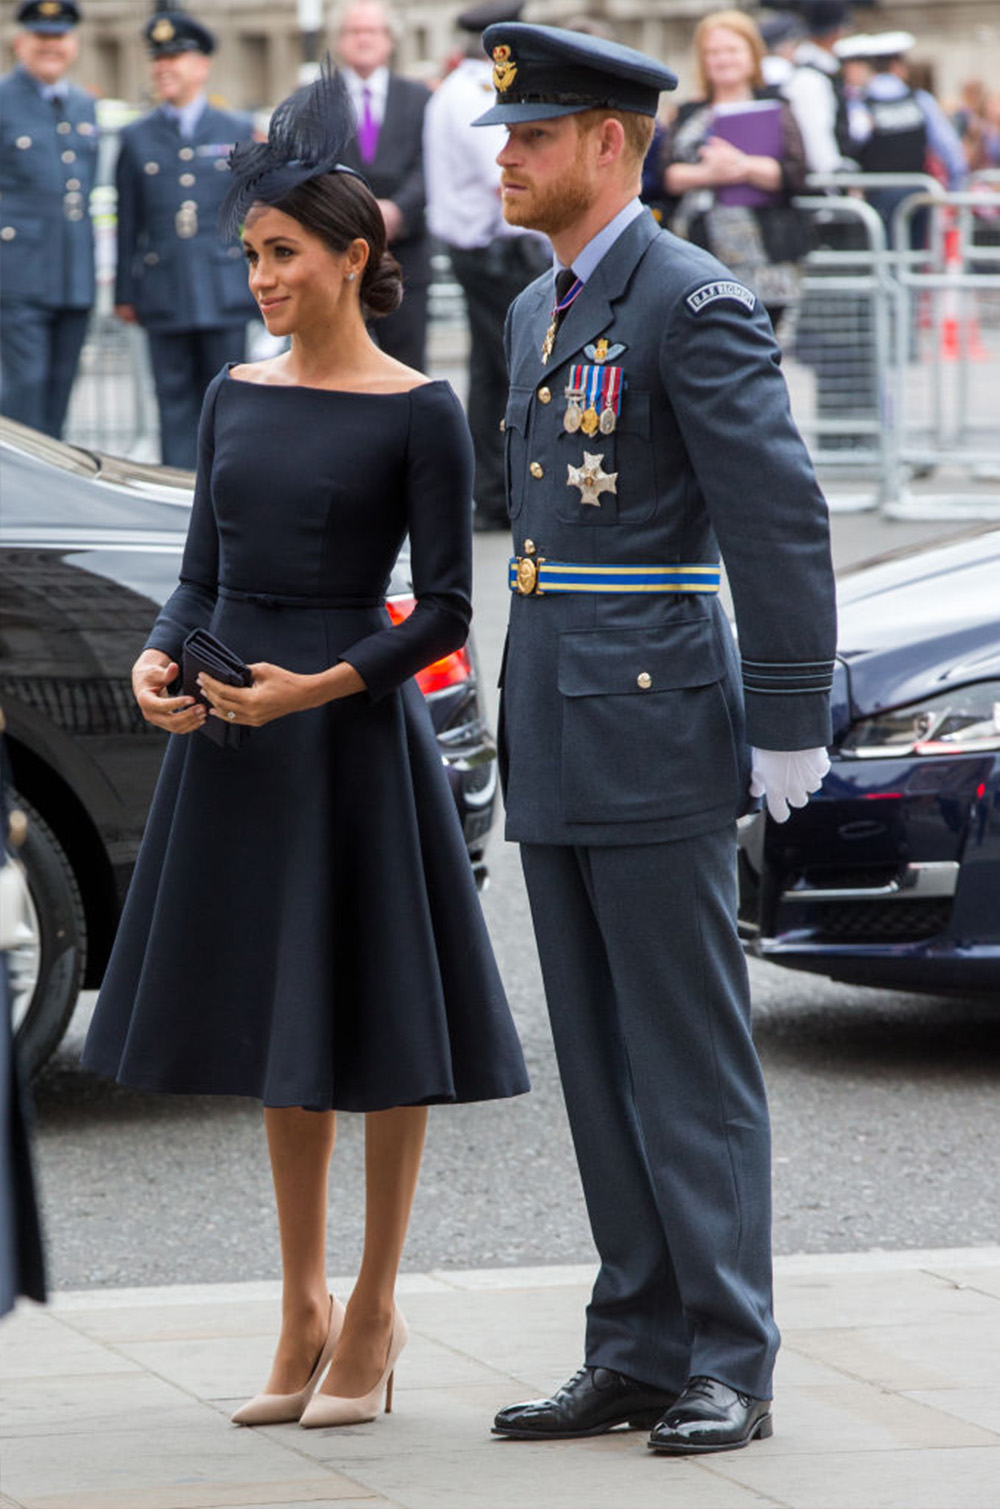 July 10, 2018: Meghan, Duchess of Sussex, wearing a black Dior dress again with a neckline reminiscent of her wedding dress to Westminster Abbey to mark the centenary of the Royal Air Force. The elegant style is accessorised with a black headpiece by royal family favourite Stephen Jones and (simple) black clutch and off-white heels both also by Dior.